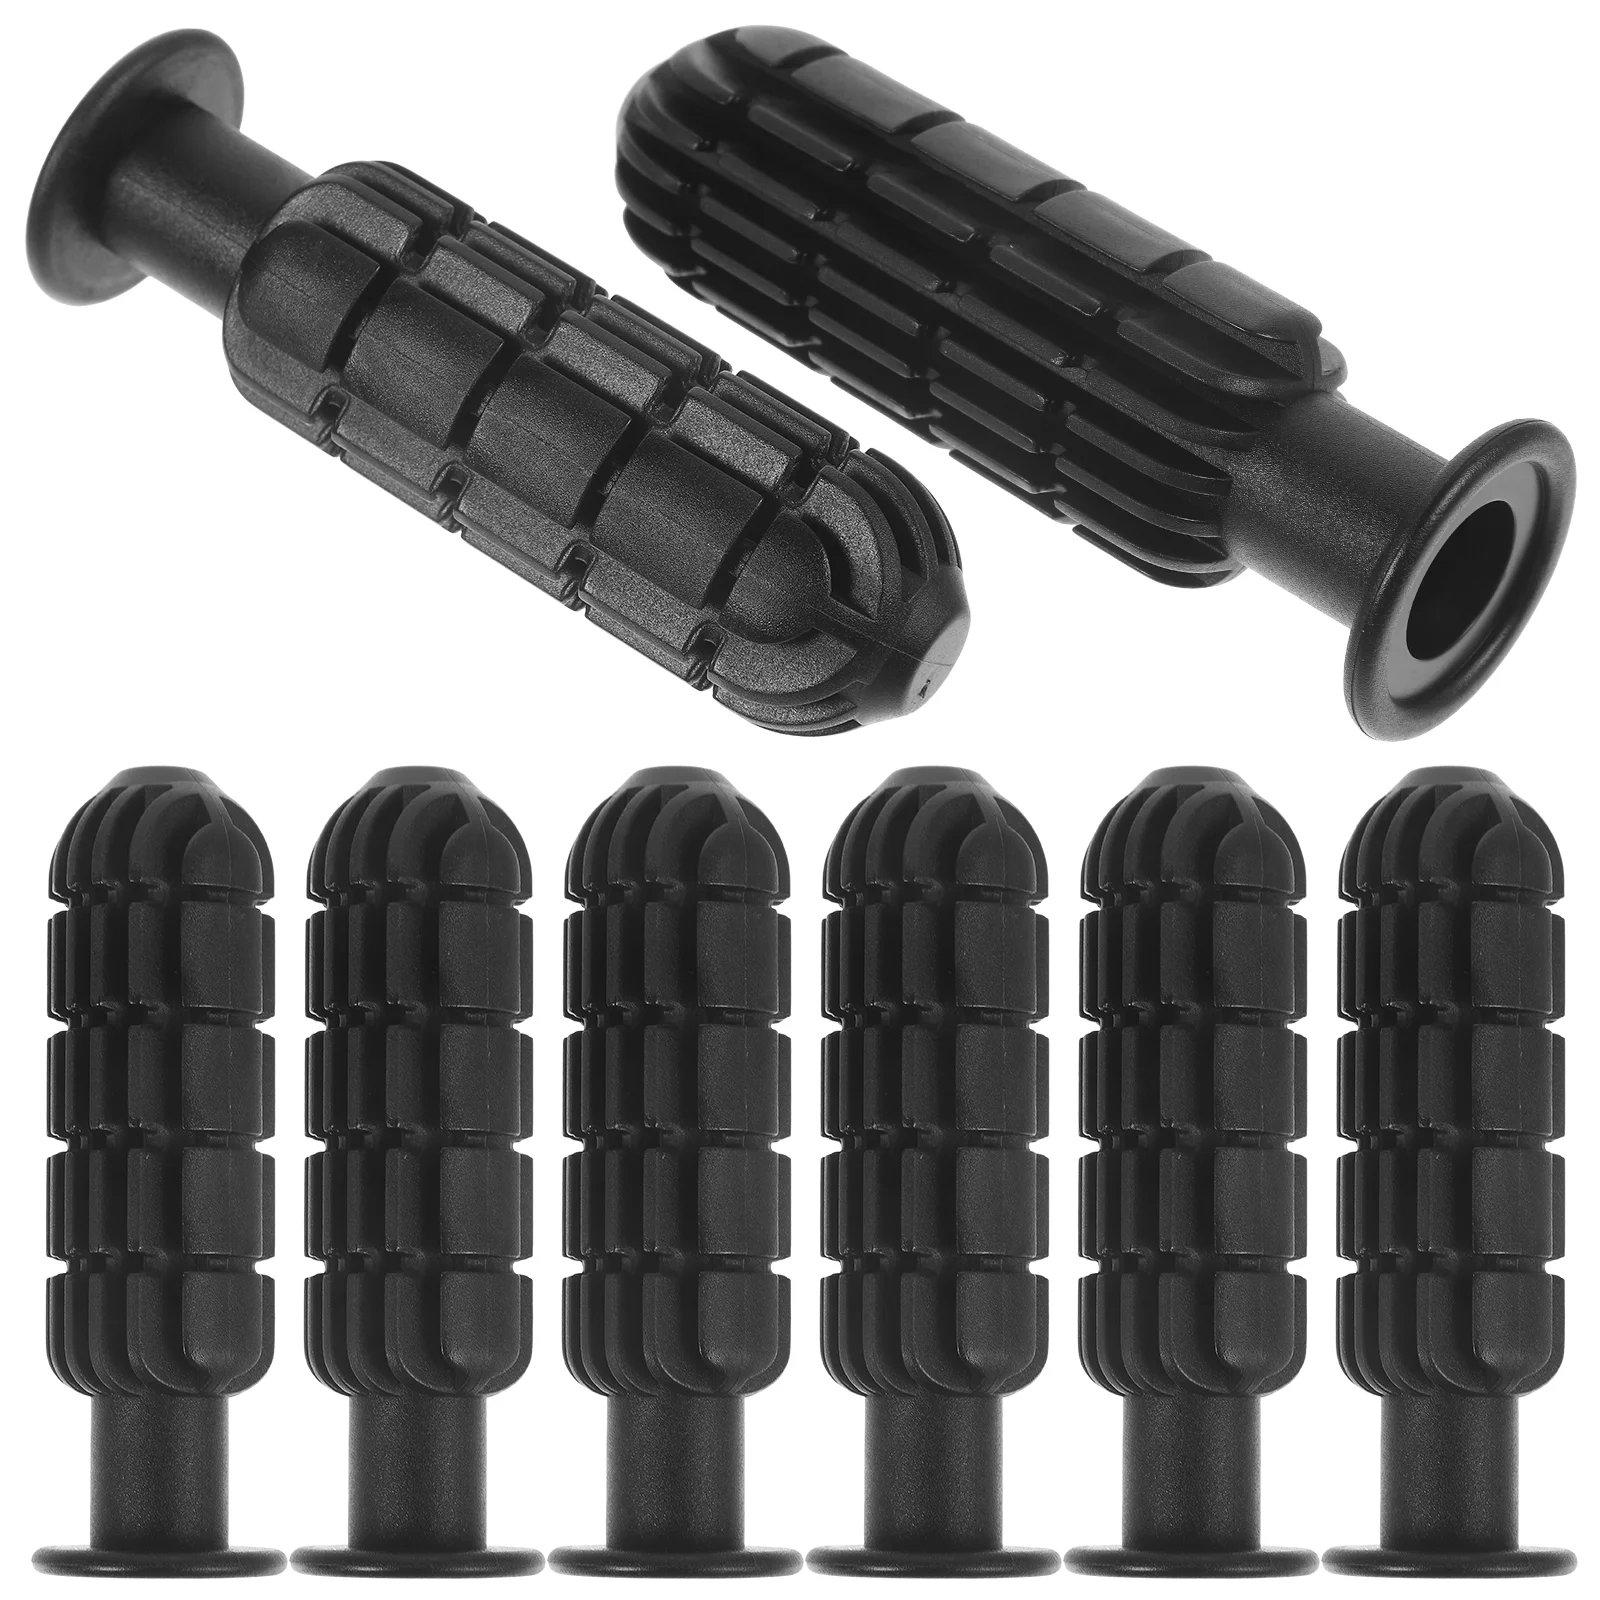 

8 Pcs Football Machine Accessories Sturdy Foosball Grips Table Soccer Handles Replace Nonskid Plastic Replacement Pp